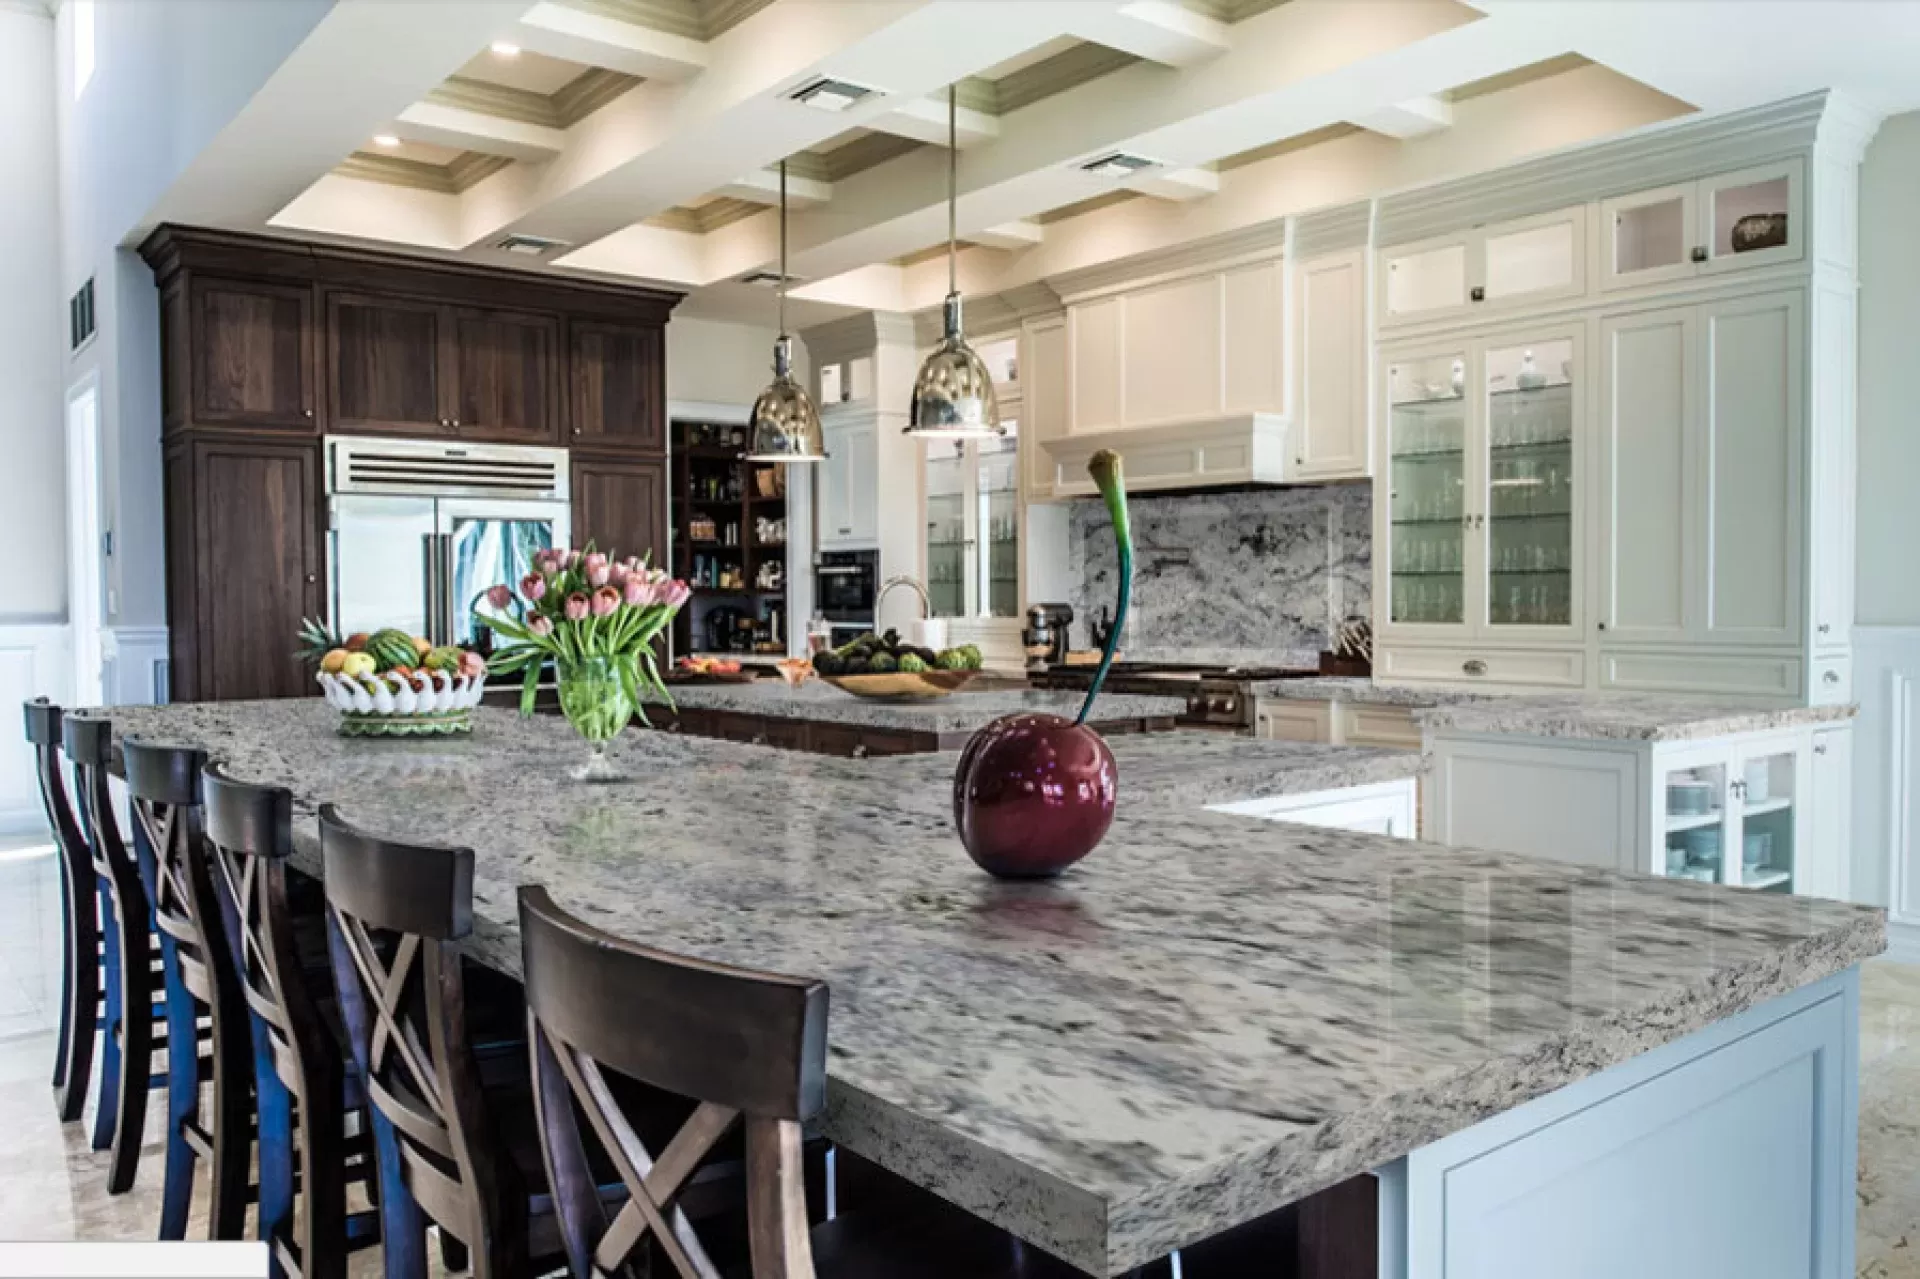 The Benefits of Using Granite Countertops in Your Home